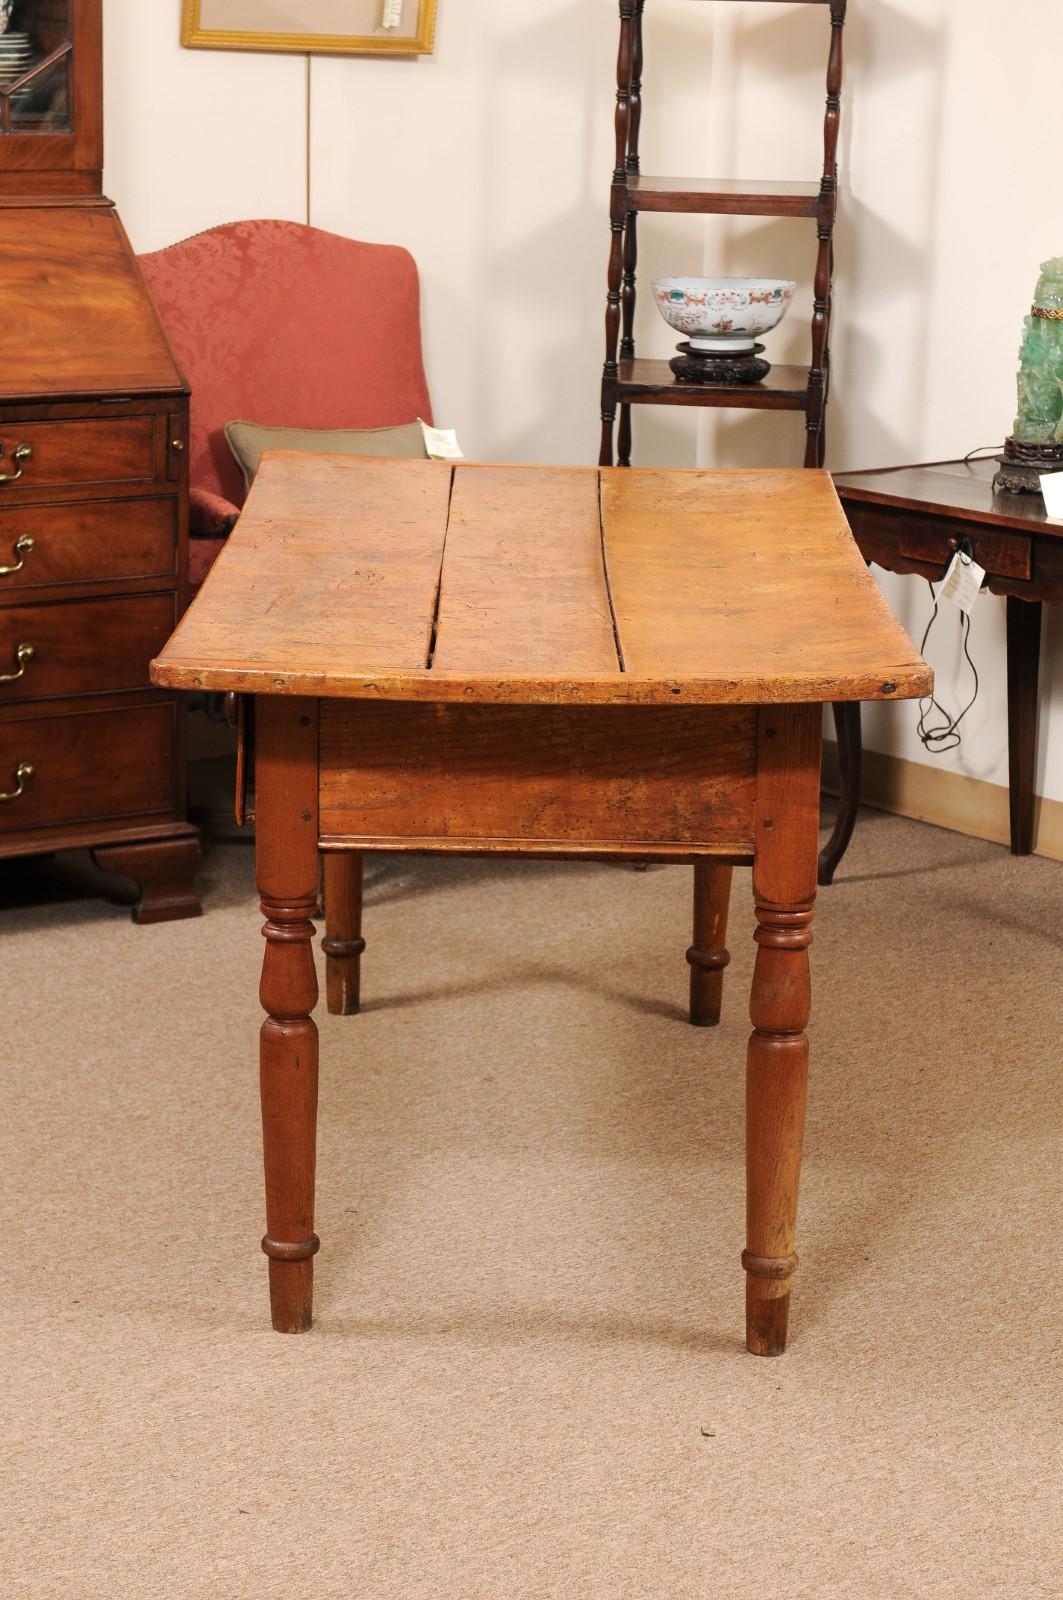 Large American Pine Kitchen Table with 2 Deep Drawers and Turned Legs, c1890 For Sale 6